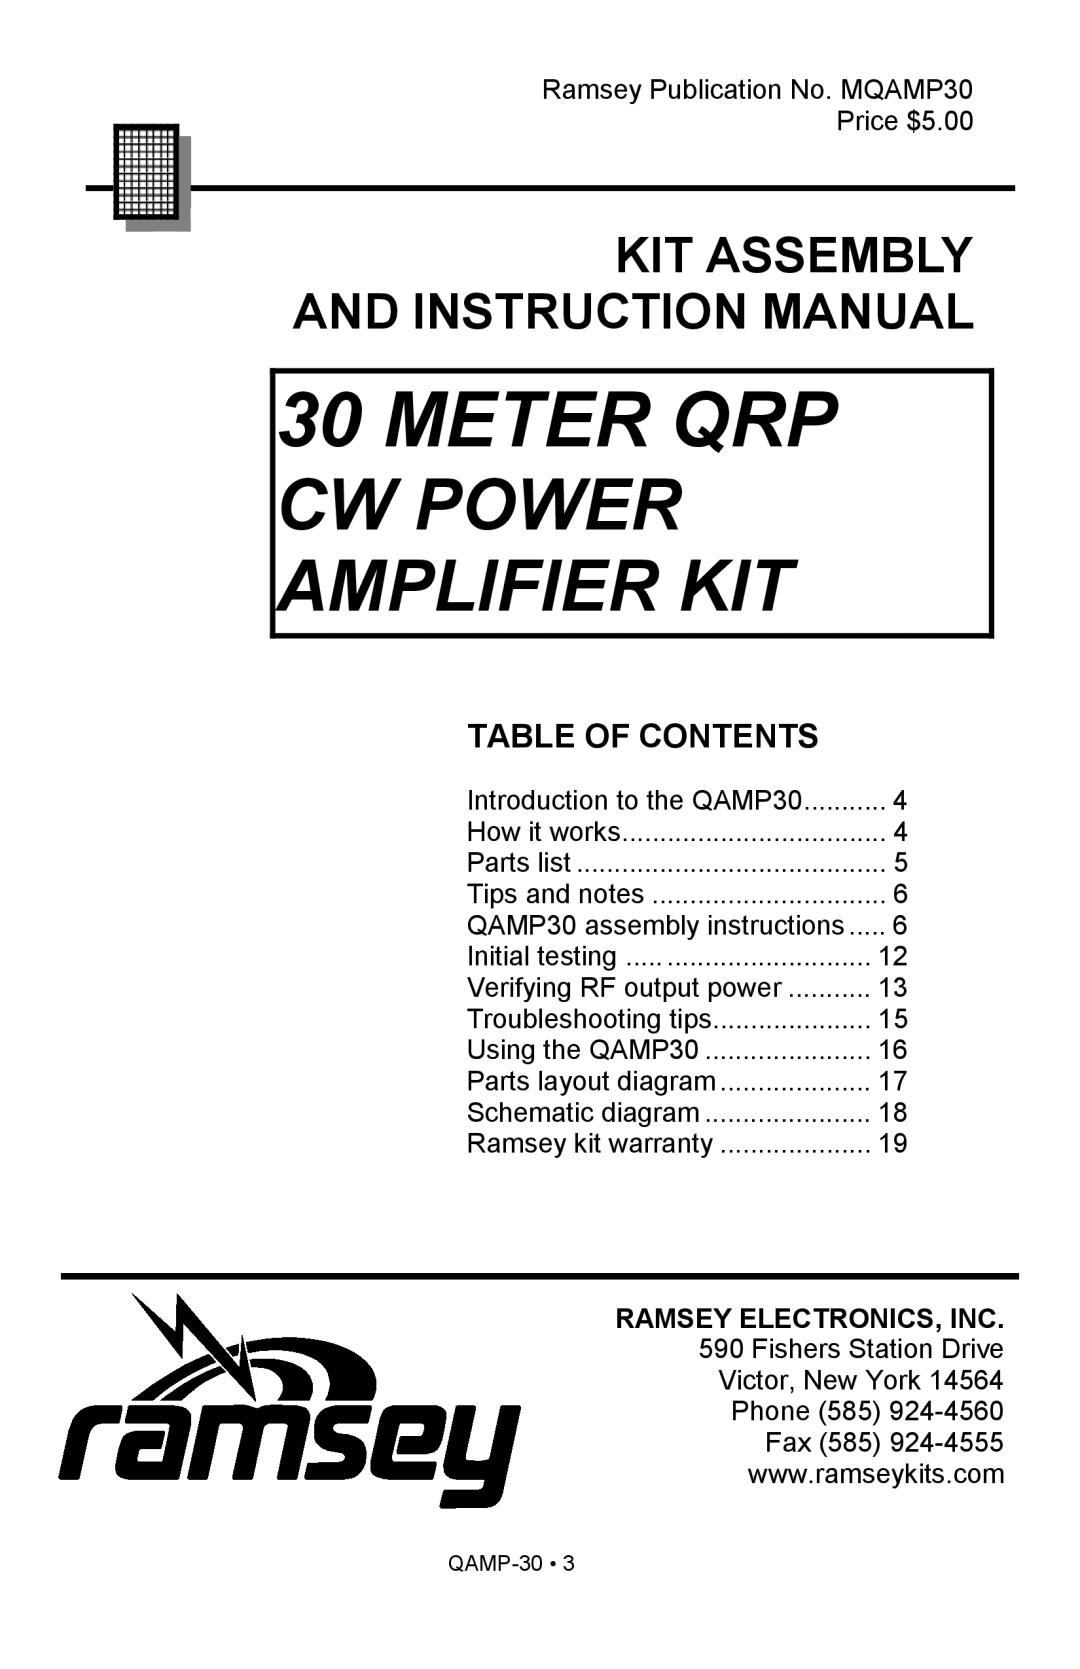 Ramsey Electronics QAMP30 manual Meter Qrp, Cw Power, Amplifier Kit, Table Of Contents 